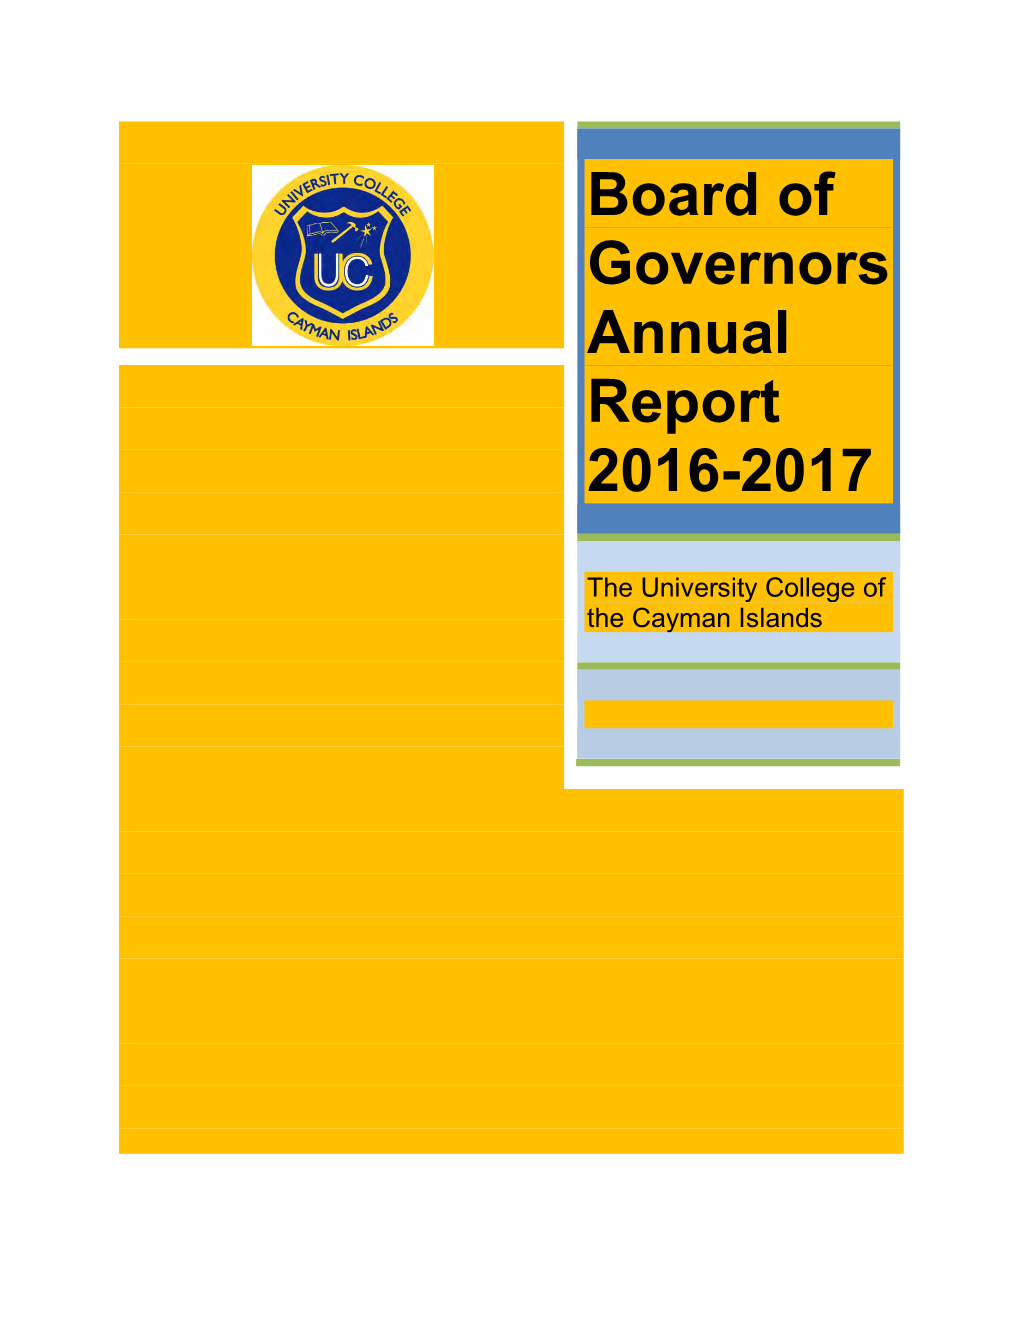 Board of Governors Annual Report 2016-2017